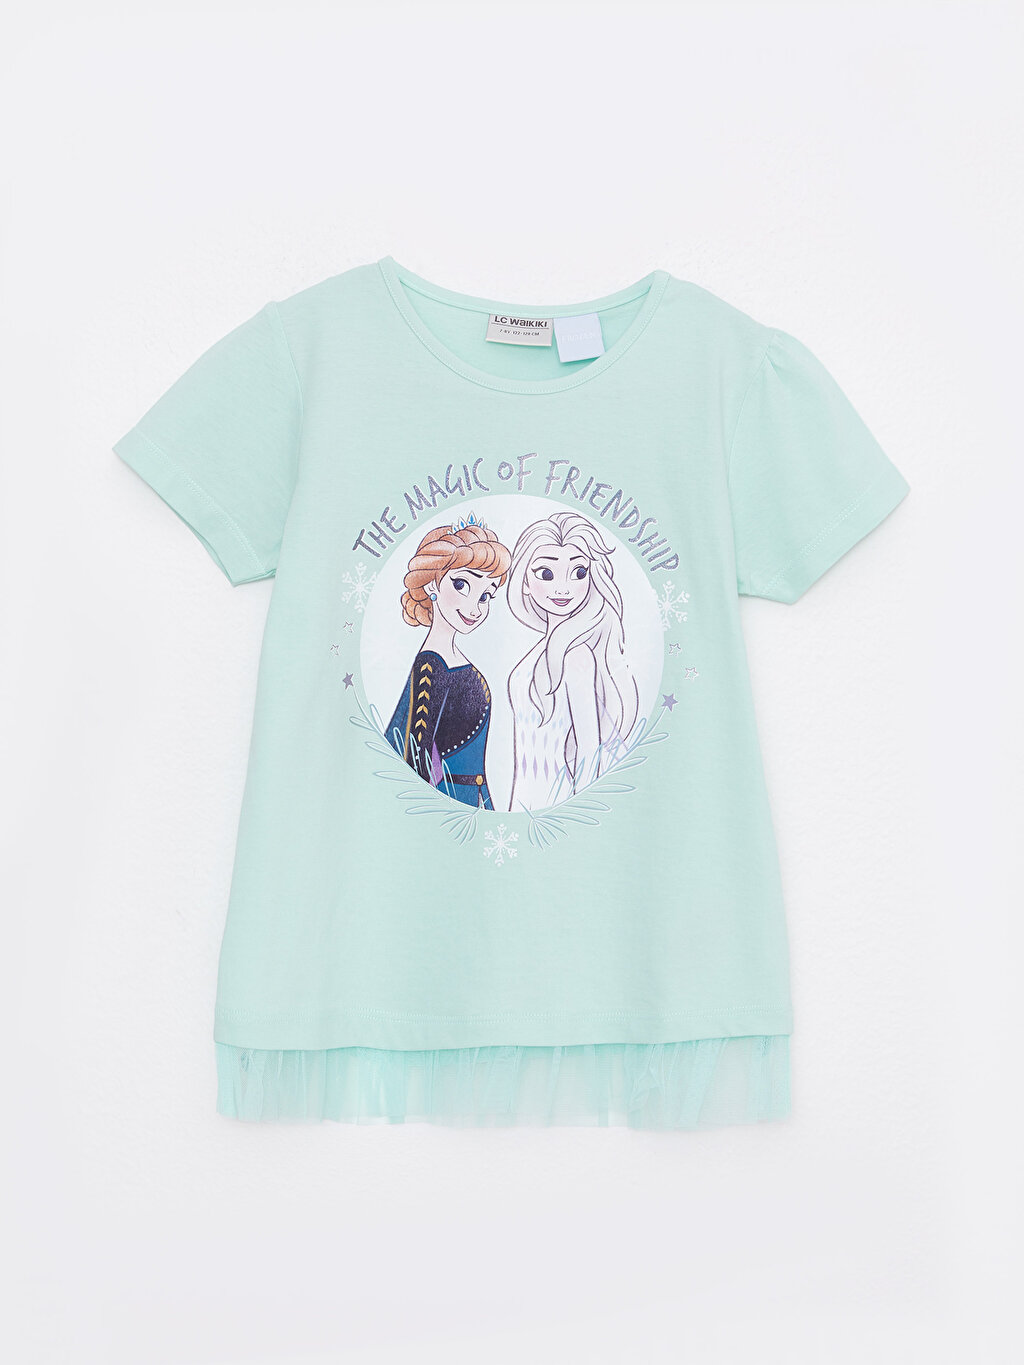 Crew Neck Frozen Printed Short Sleeve Girl T-Shirt -S2H475Z4-FPW -  S2H475Z4-FPW - LC Waikiki